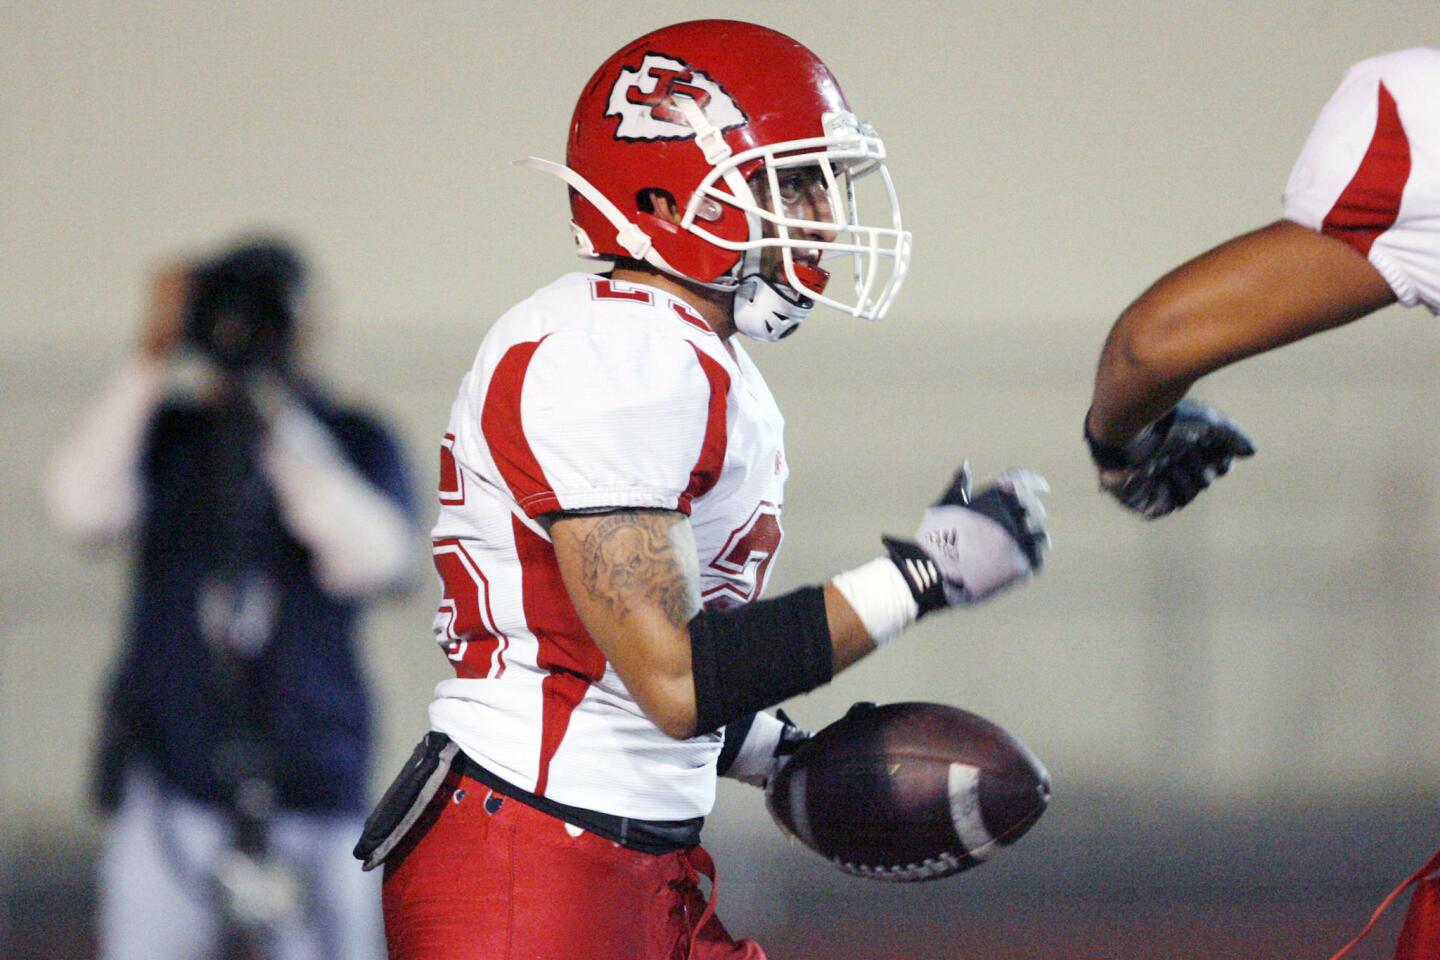 Burroughs' Israel Montes bumps fists with Victor Mora during a game against CV at Glendale High School on Thursday, October 4, 2012.